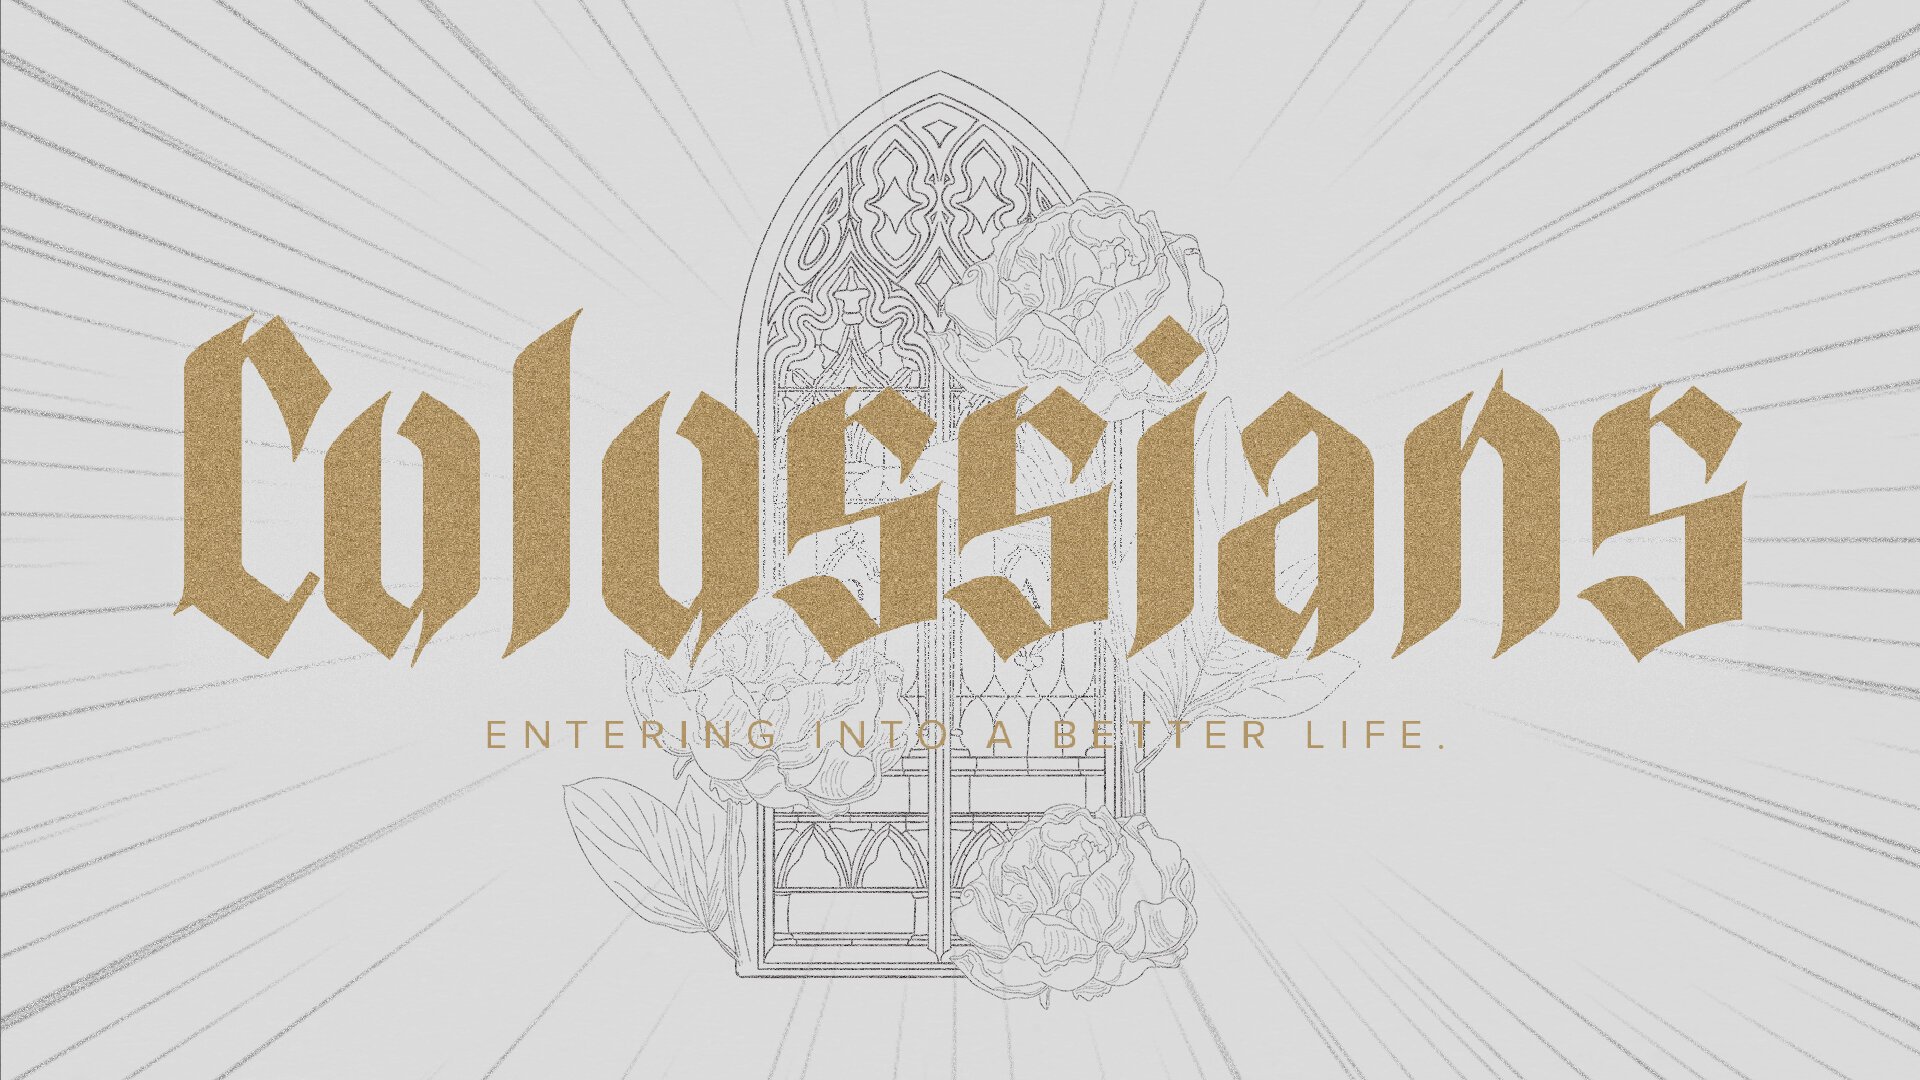 This Church Media Graphic Is Elegant And Aspirational, Featuring The Book Of &Quot;Colossians&Quot; In Gold, Gothic Lettering With The Phrase &Quot;Entering Into A Better Life.&Quot; It Is Set Against A Radiant Backdrop That Draws The Eye To A Detailed Stained Glass Window, Suggesting Illumination And Divine Beauty.